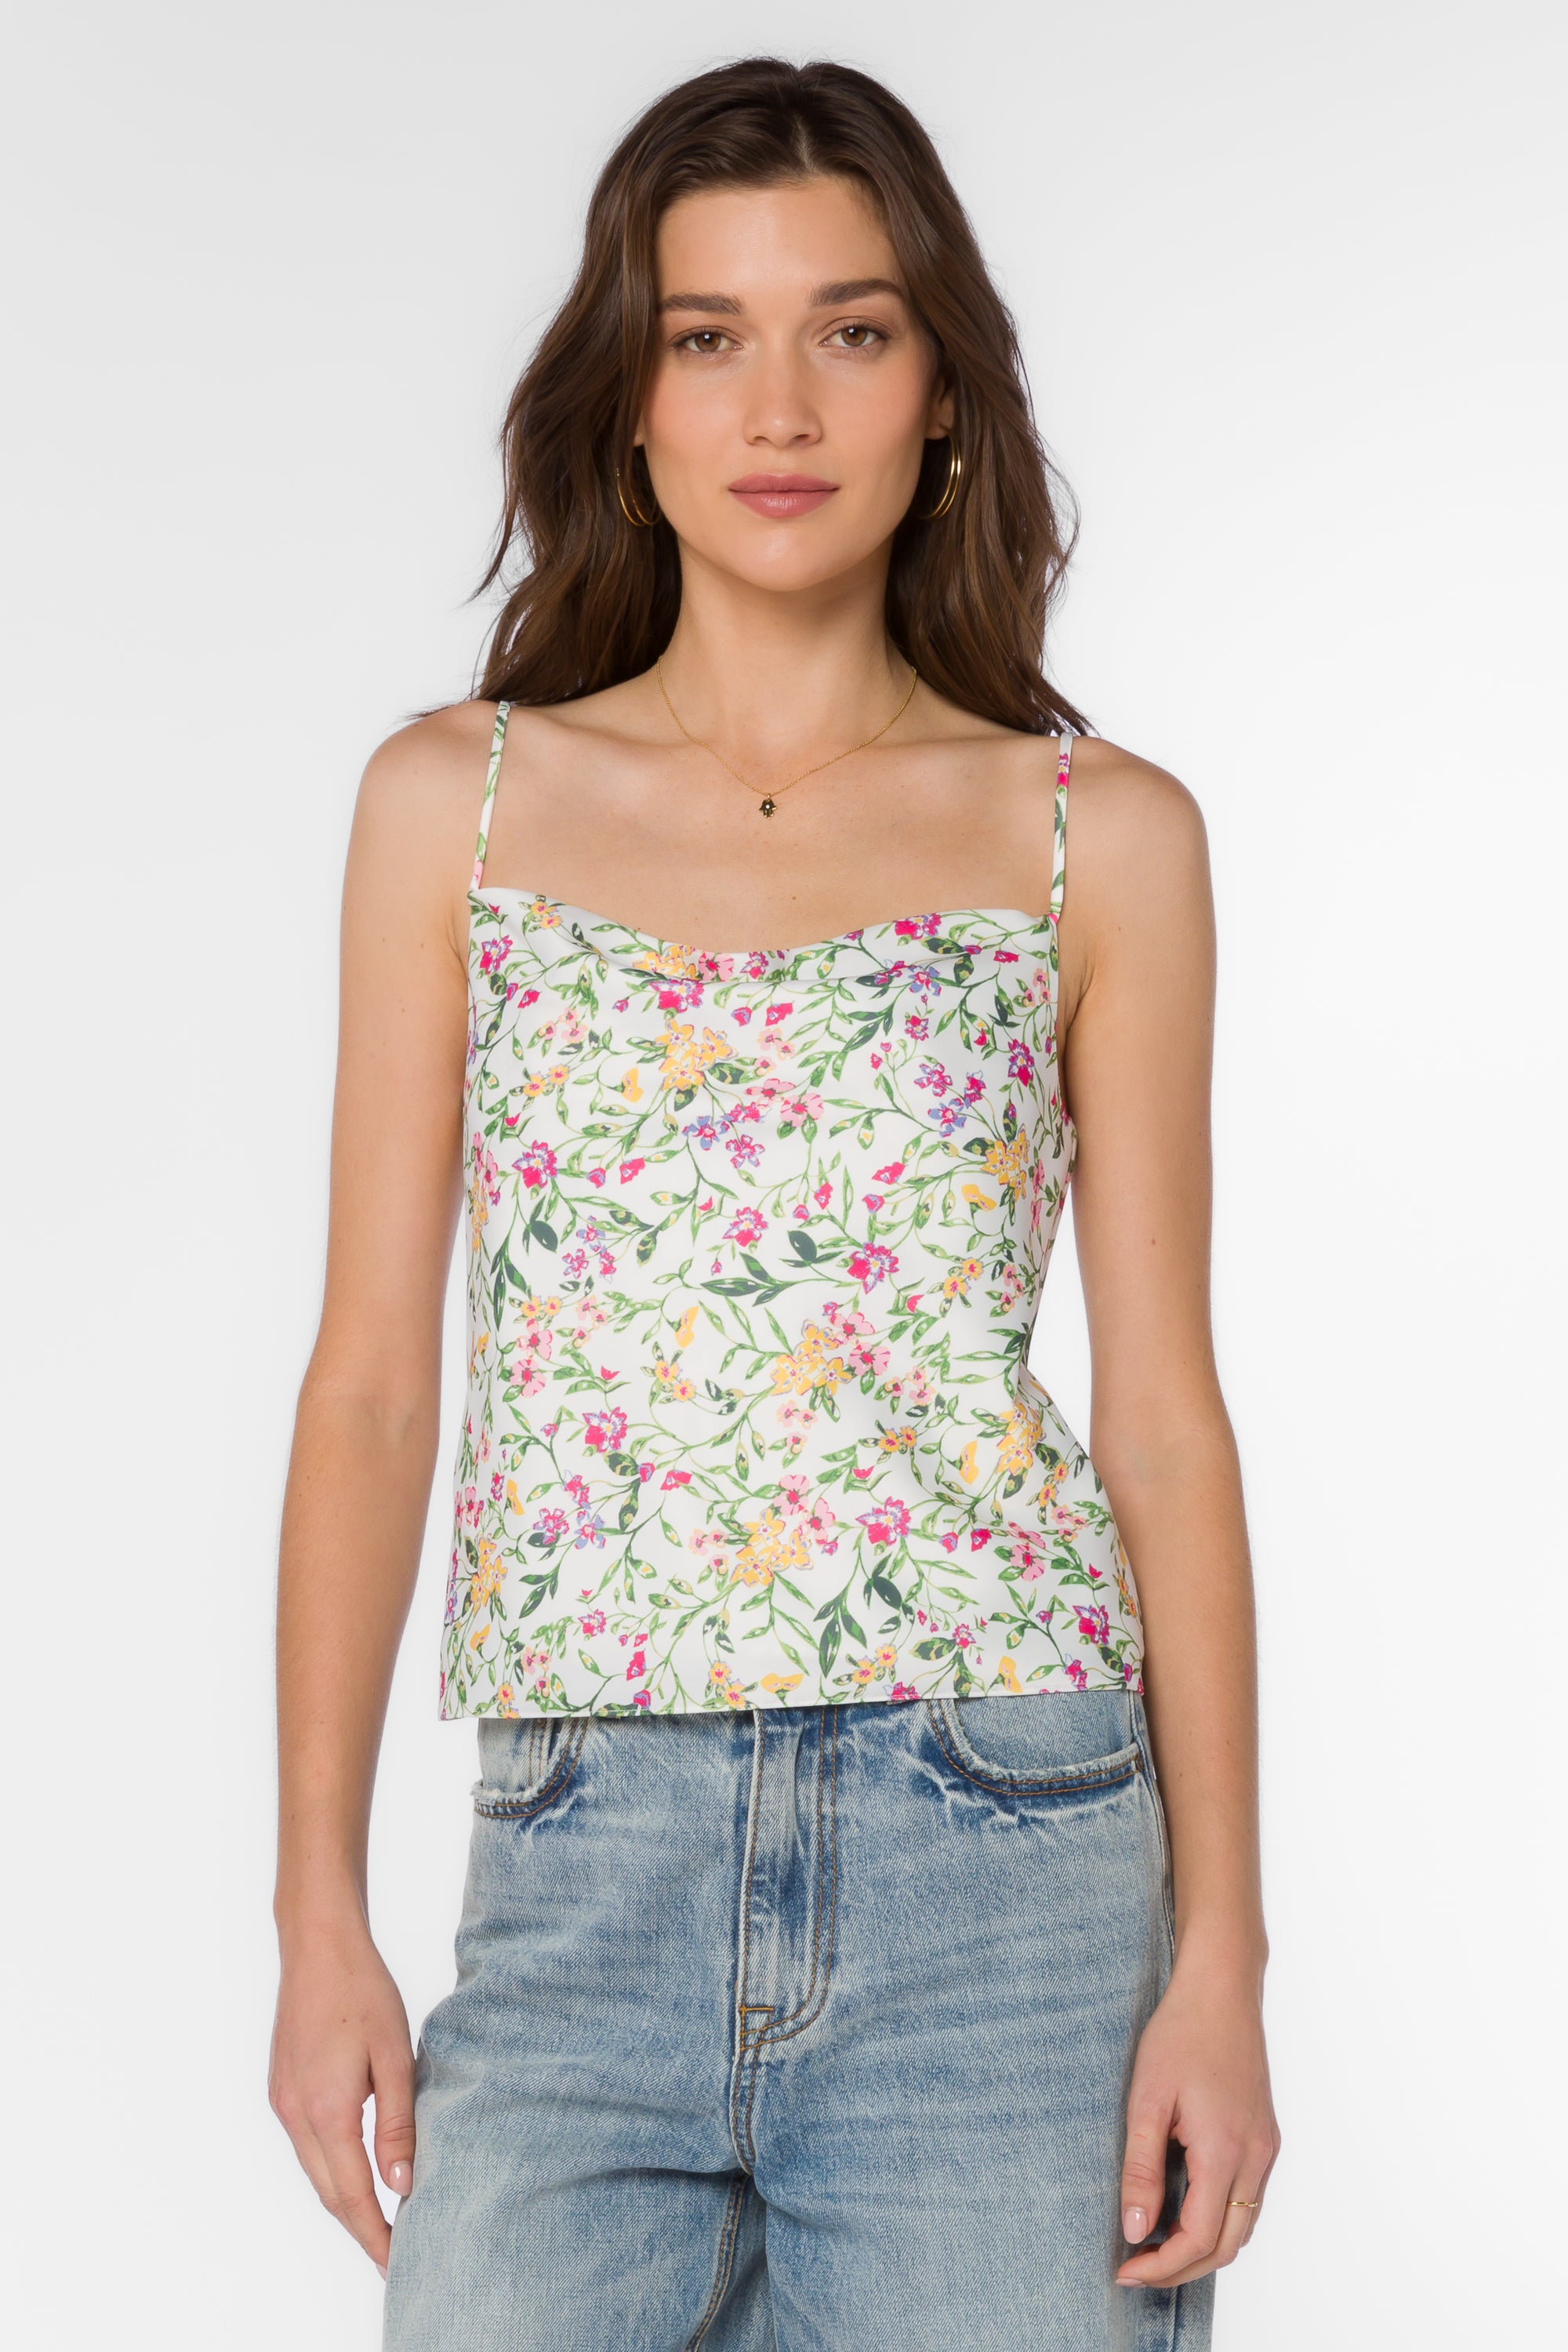 Wallace Spring Ivy Top - Tops - Velvet Heart Clothing